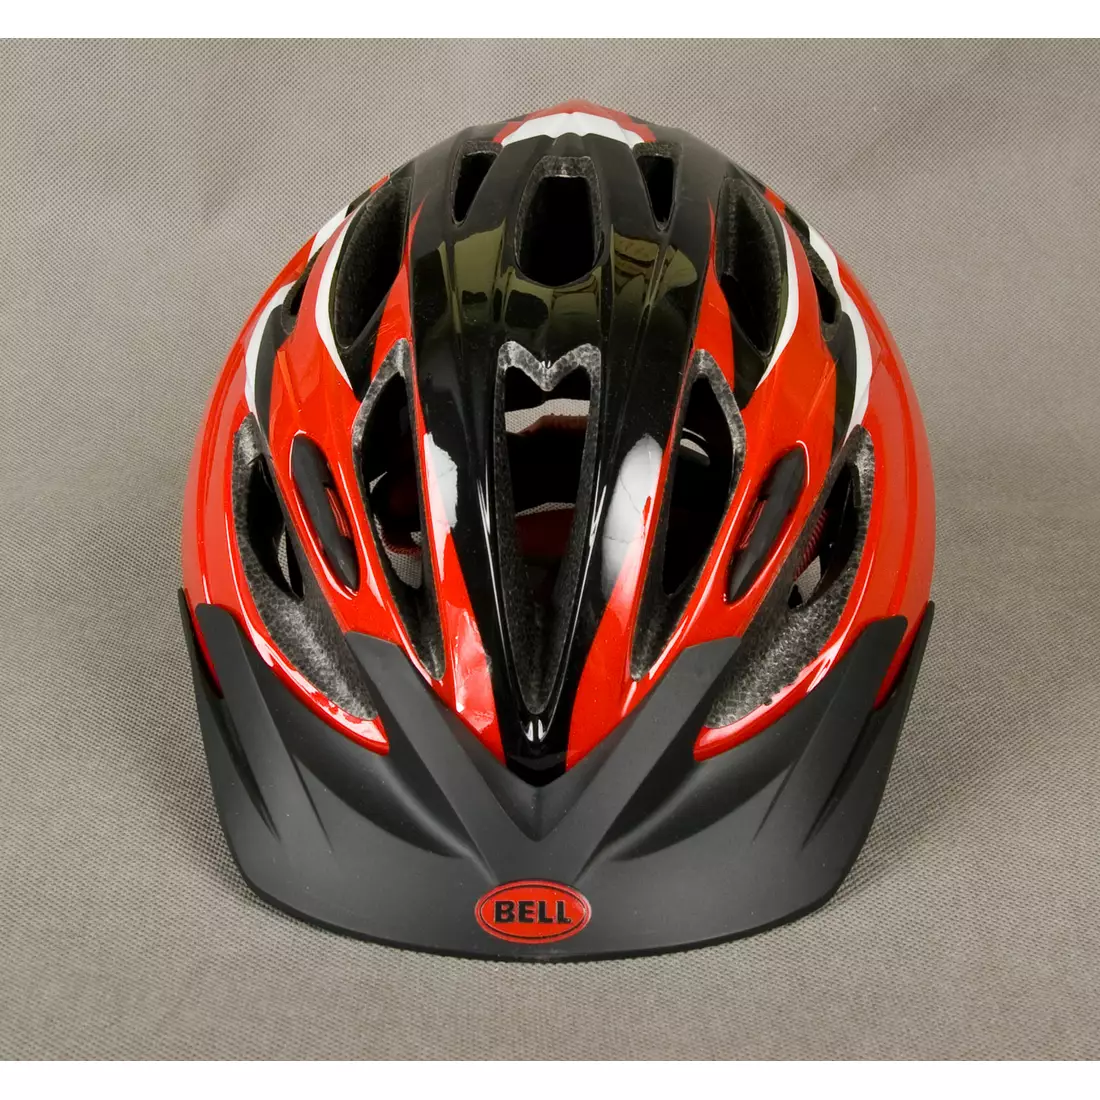 BELL PRESIDIO - bicycle helmet, color: Red and black